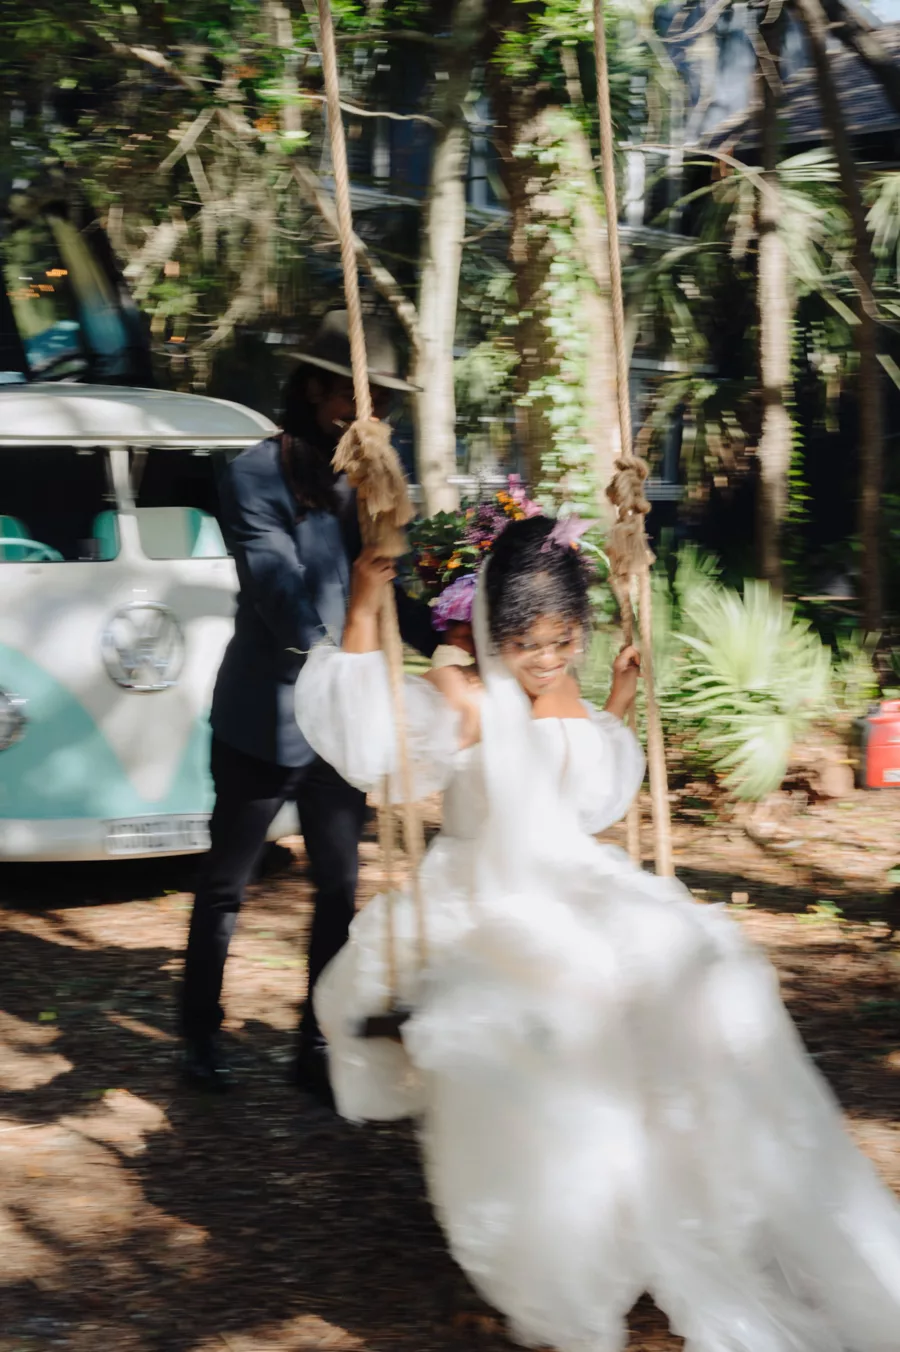 Groom Pushing Bride on Swing | Tampa Bay Photographer McNeile Photography